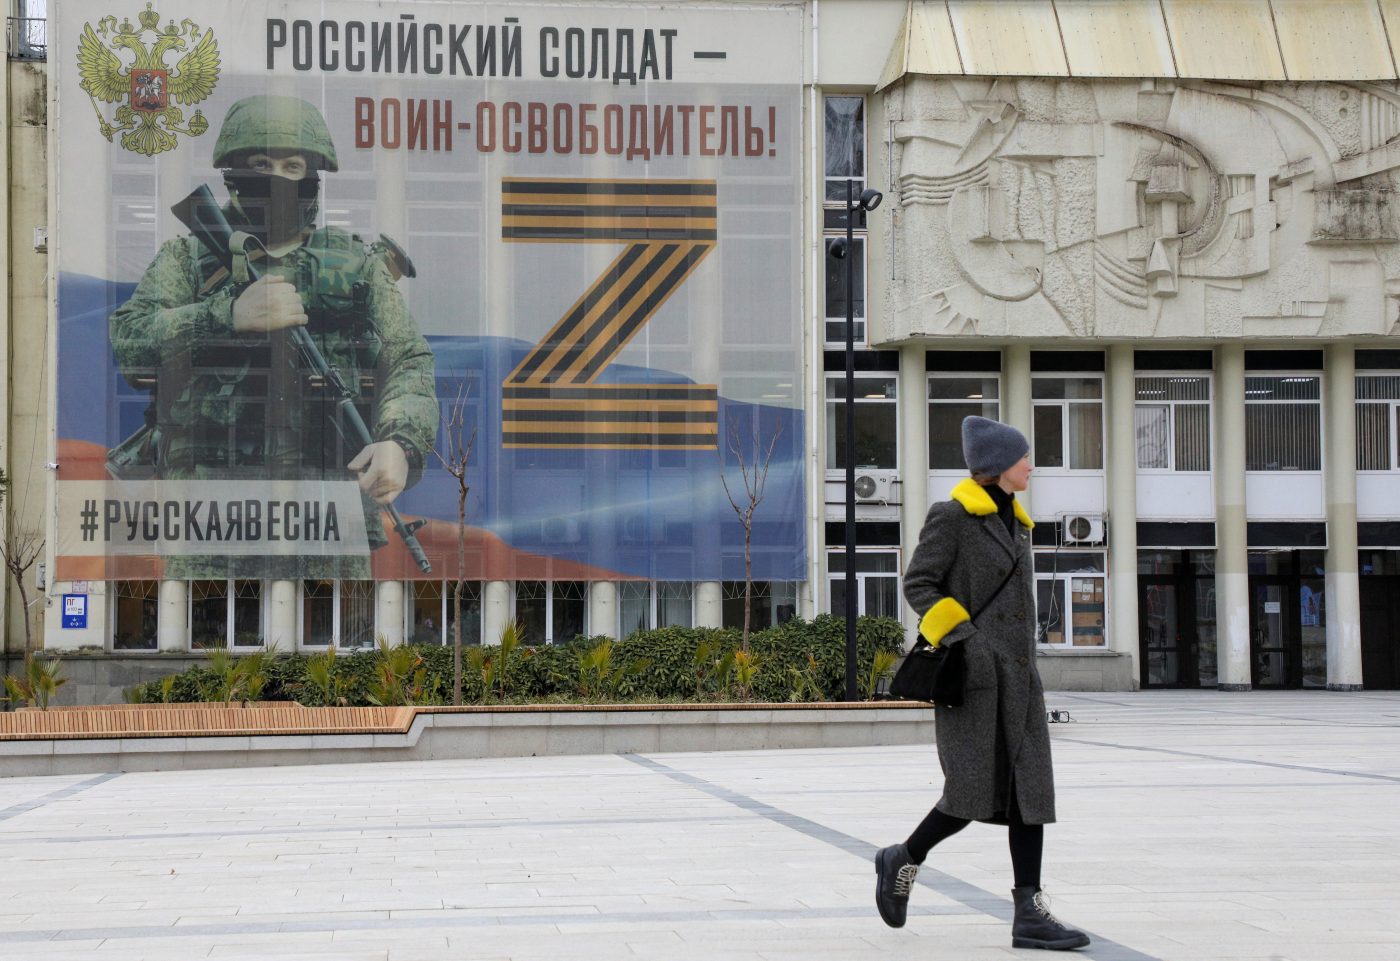 Photo: A pedestrian walks near a banner, which displays the symbol "Z" in support of the Russian armed forces involved in the country's military campaign in Ukraine, in Yalta, Crimea, February 8, 2023. One of the slogans on the banner reads: "Russian soldier is warrior-liberator!" Credit: REUTERS/Alexey Pavlishak